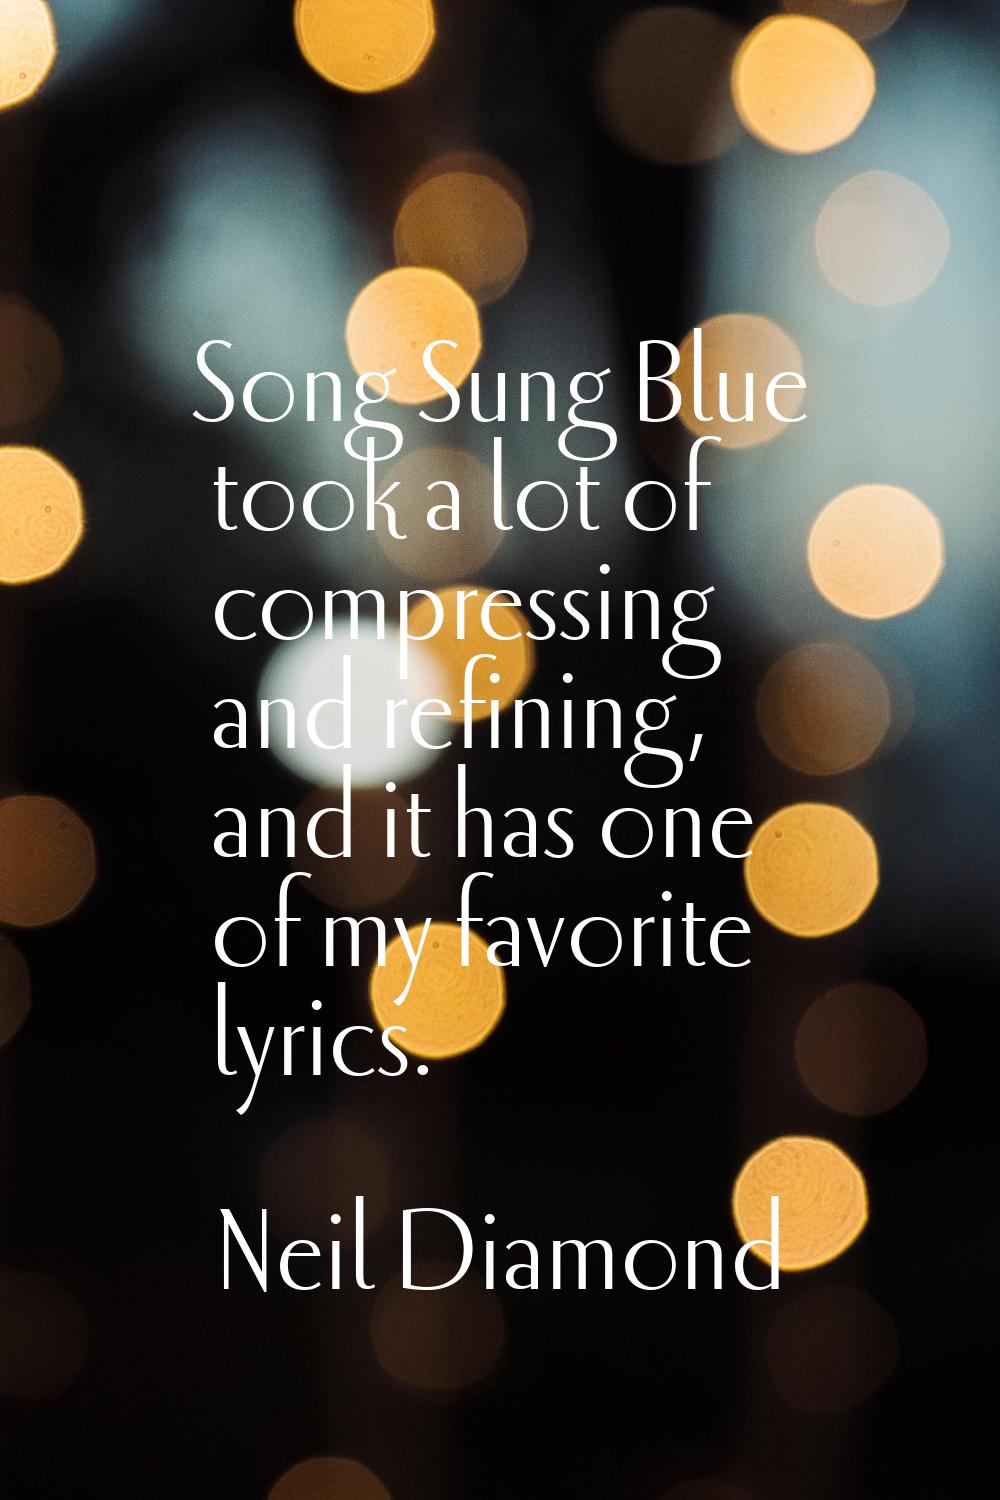 Song Sung Blue took a lot of compressing and refining, and it has one of my favorite lyrics.